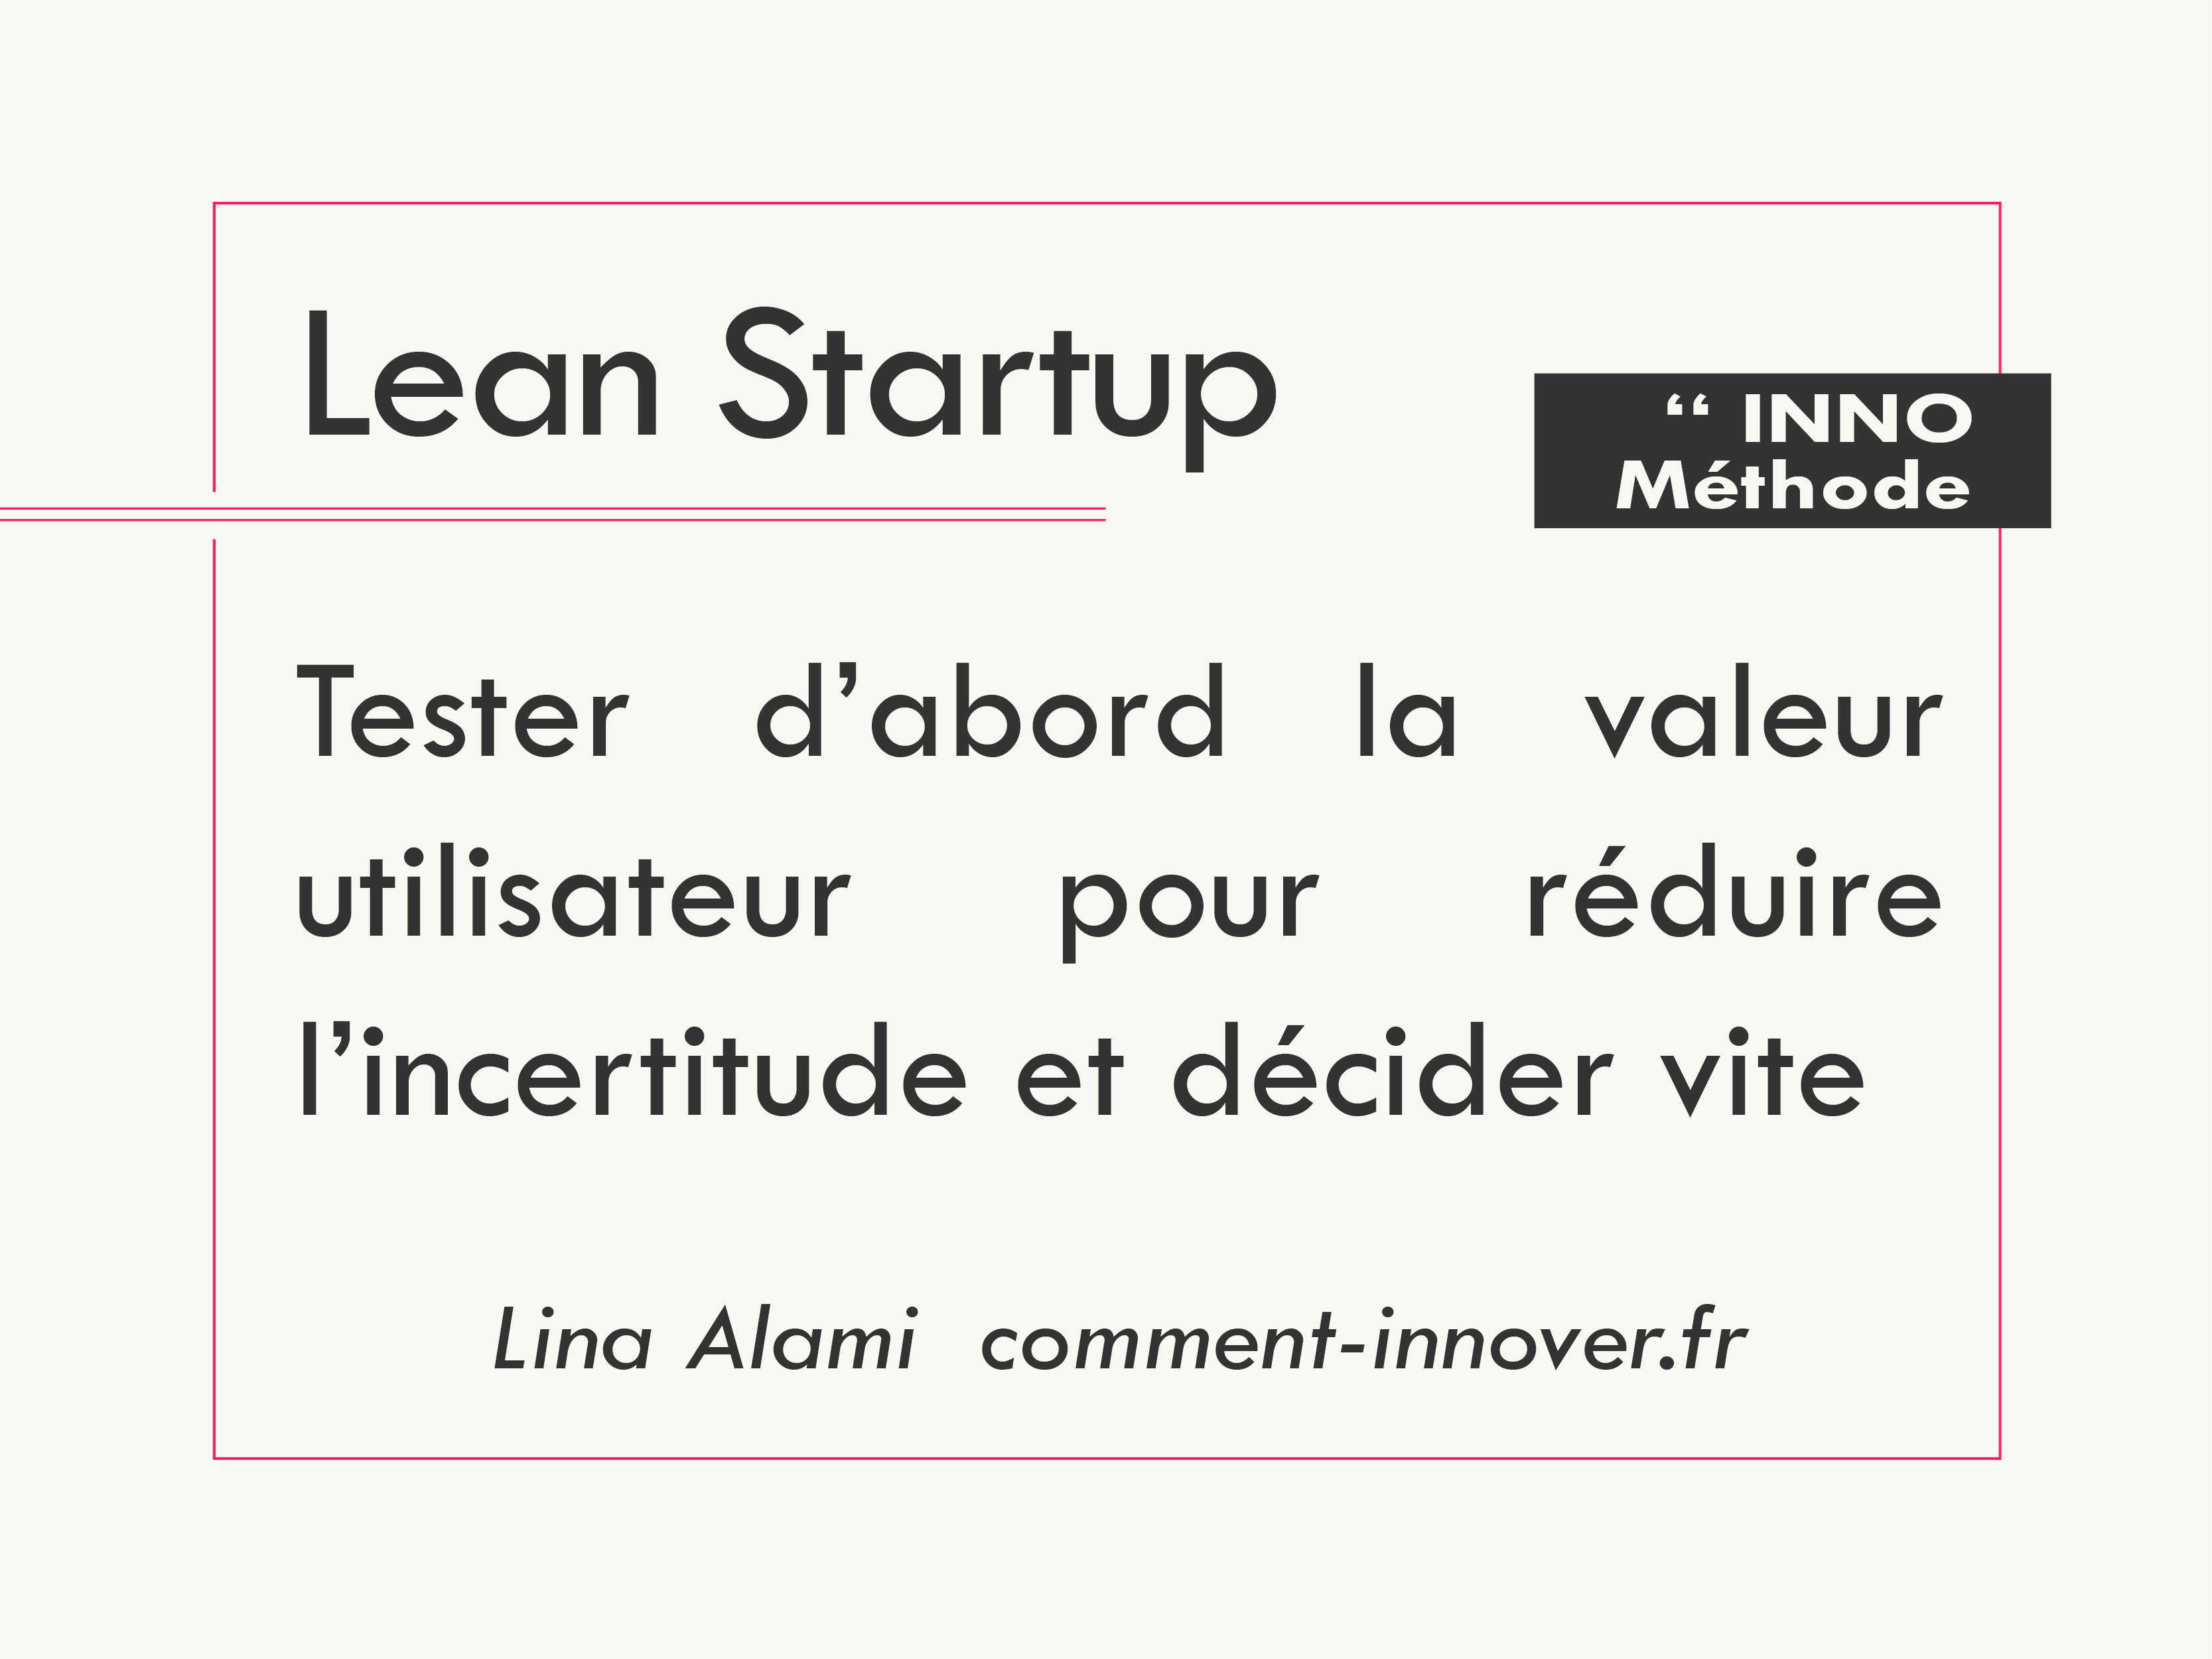 Lean startup comment innover - Lina Alami